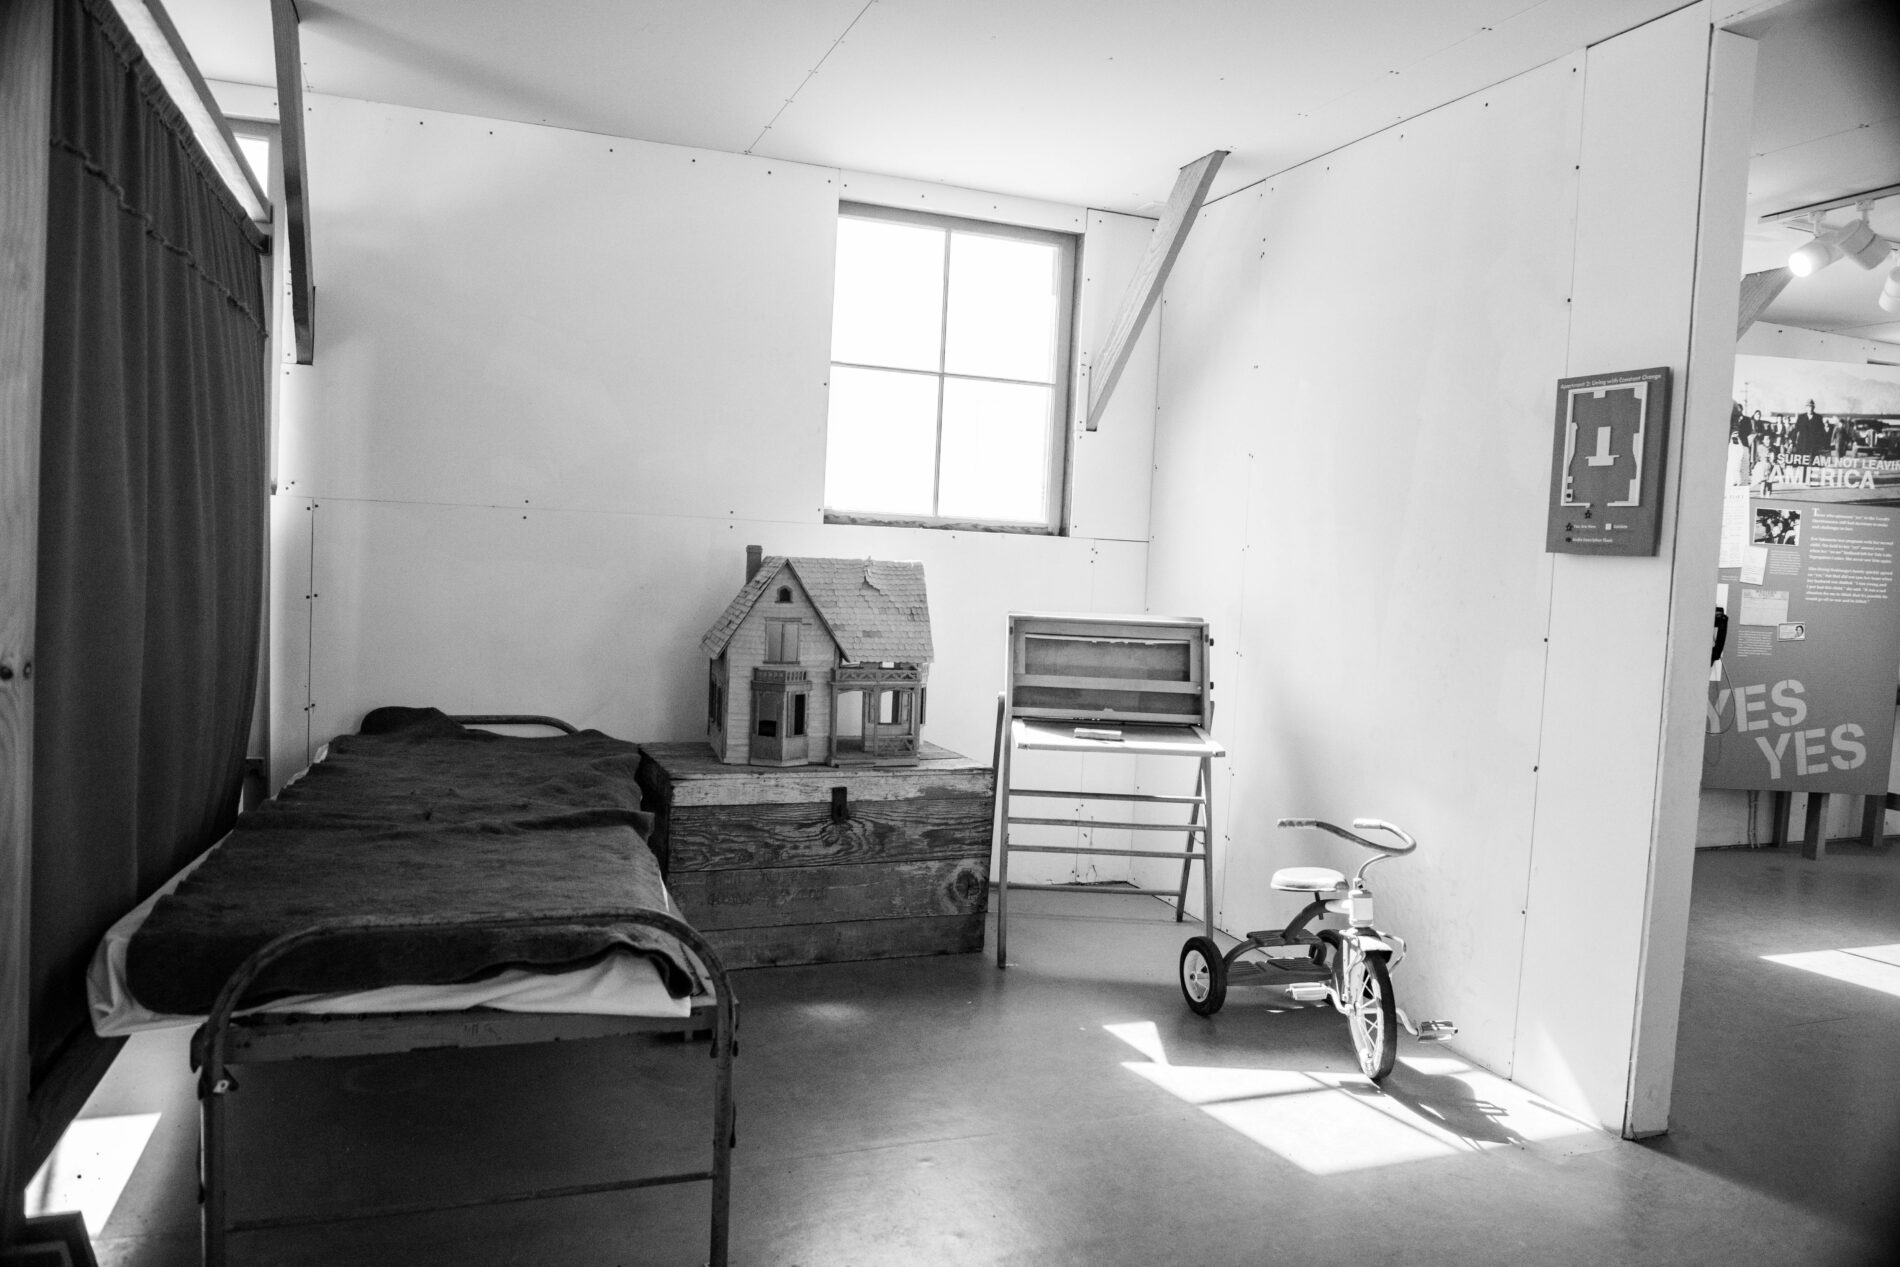 A mock up of what a child's room may have looked like at Manzanar during the internment.